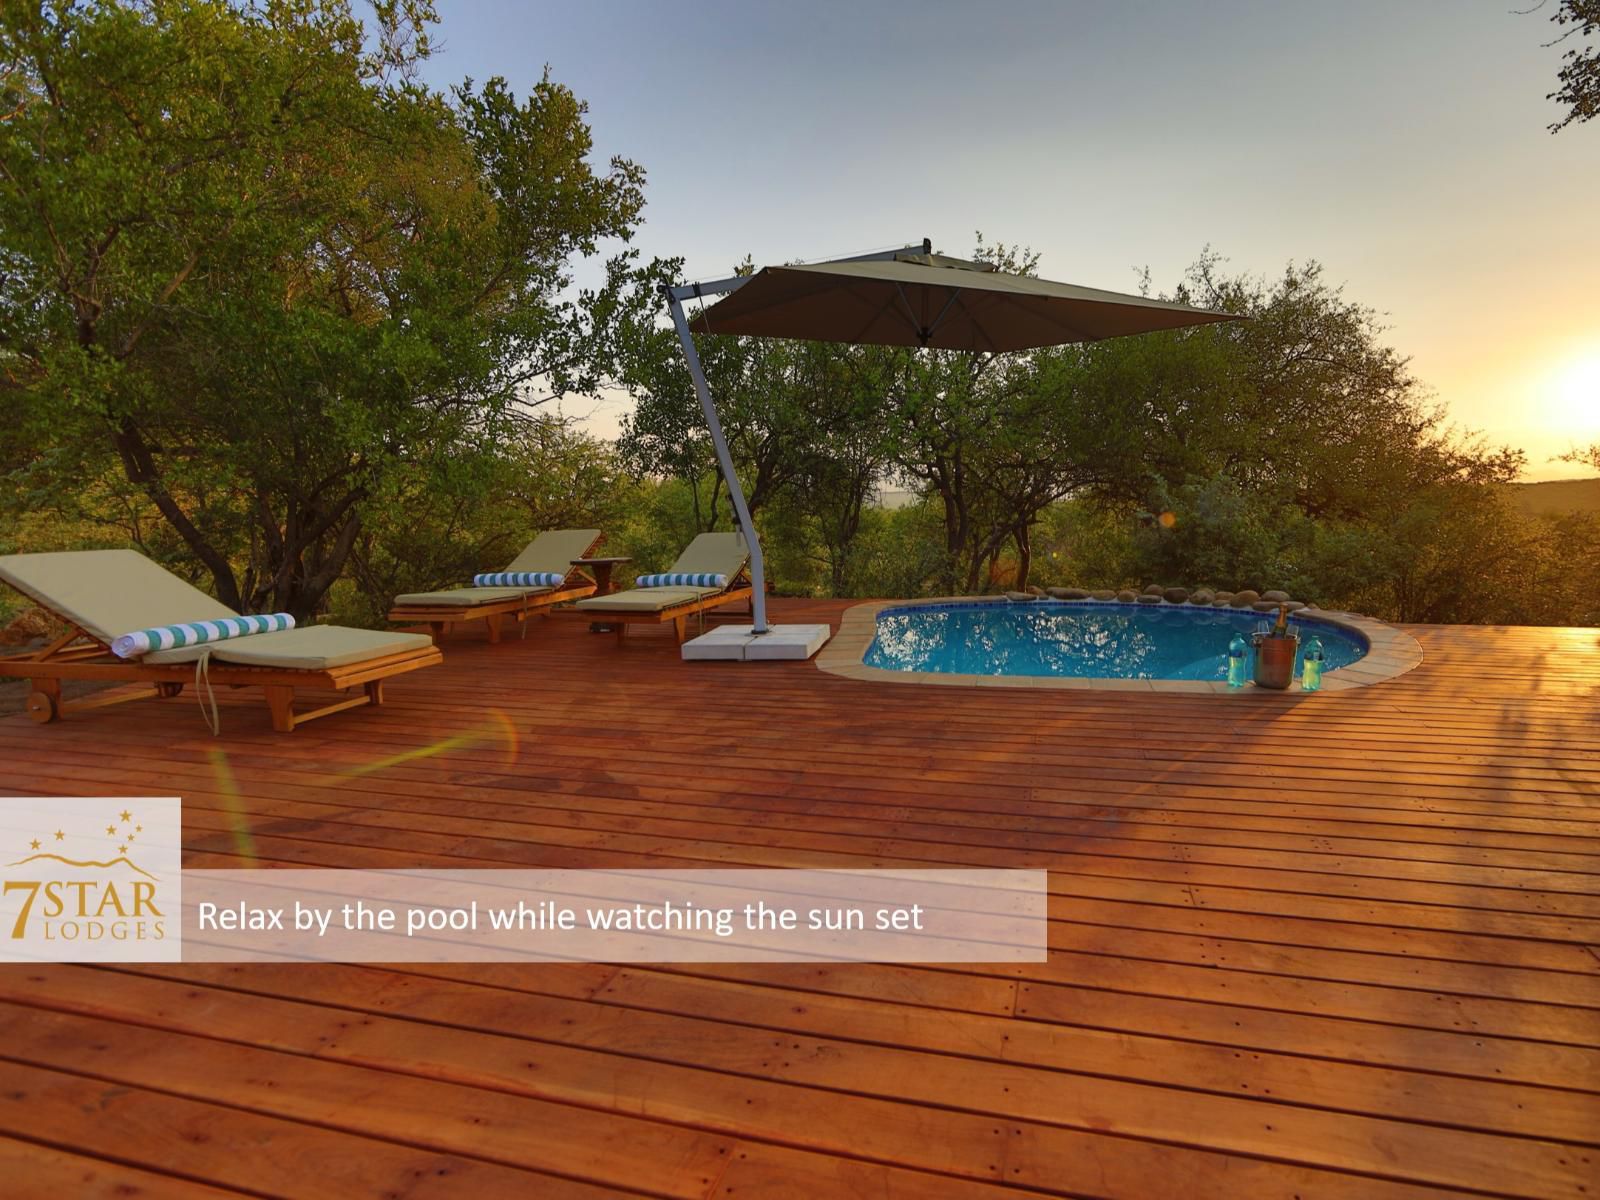 7 Star Lodges Hoedspruit Limpopo Province South Africa Swimming Pool